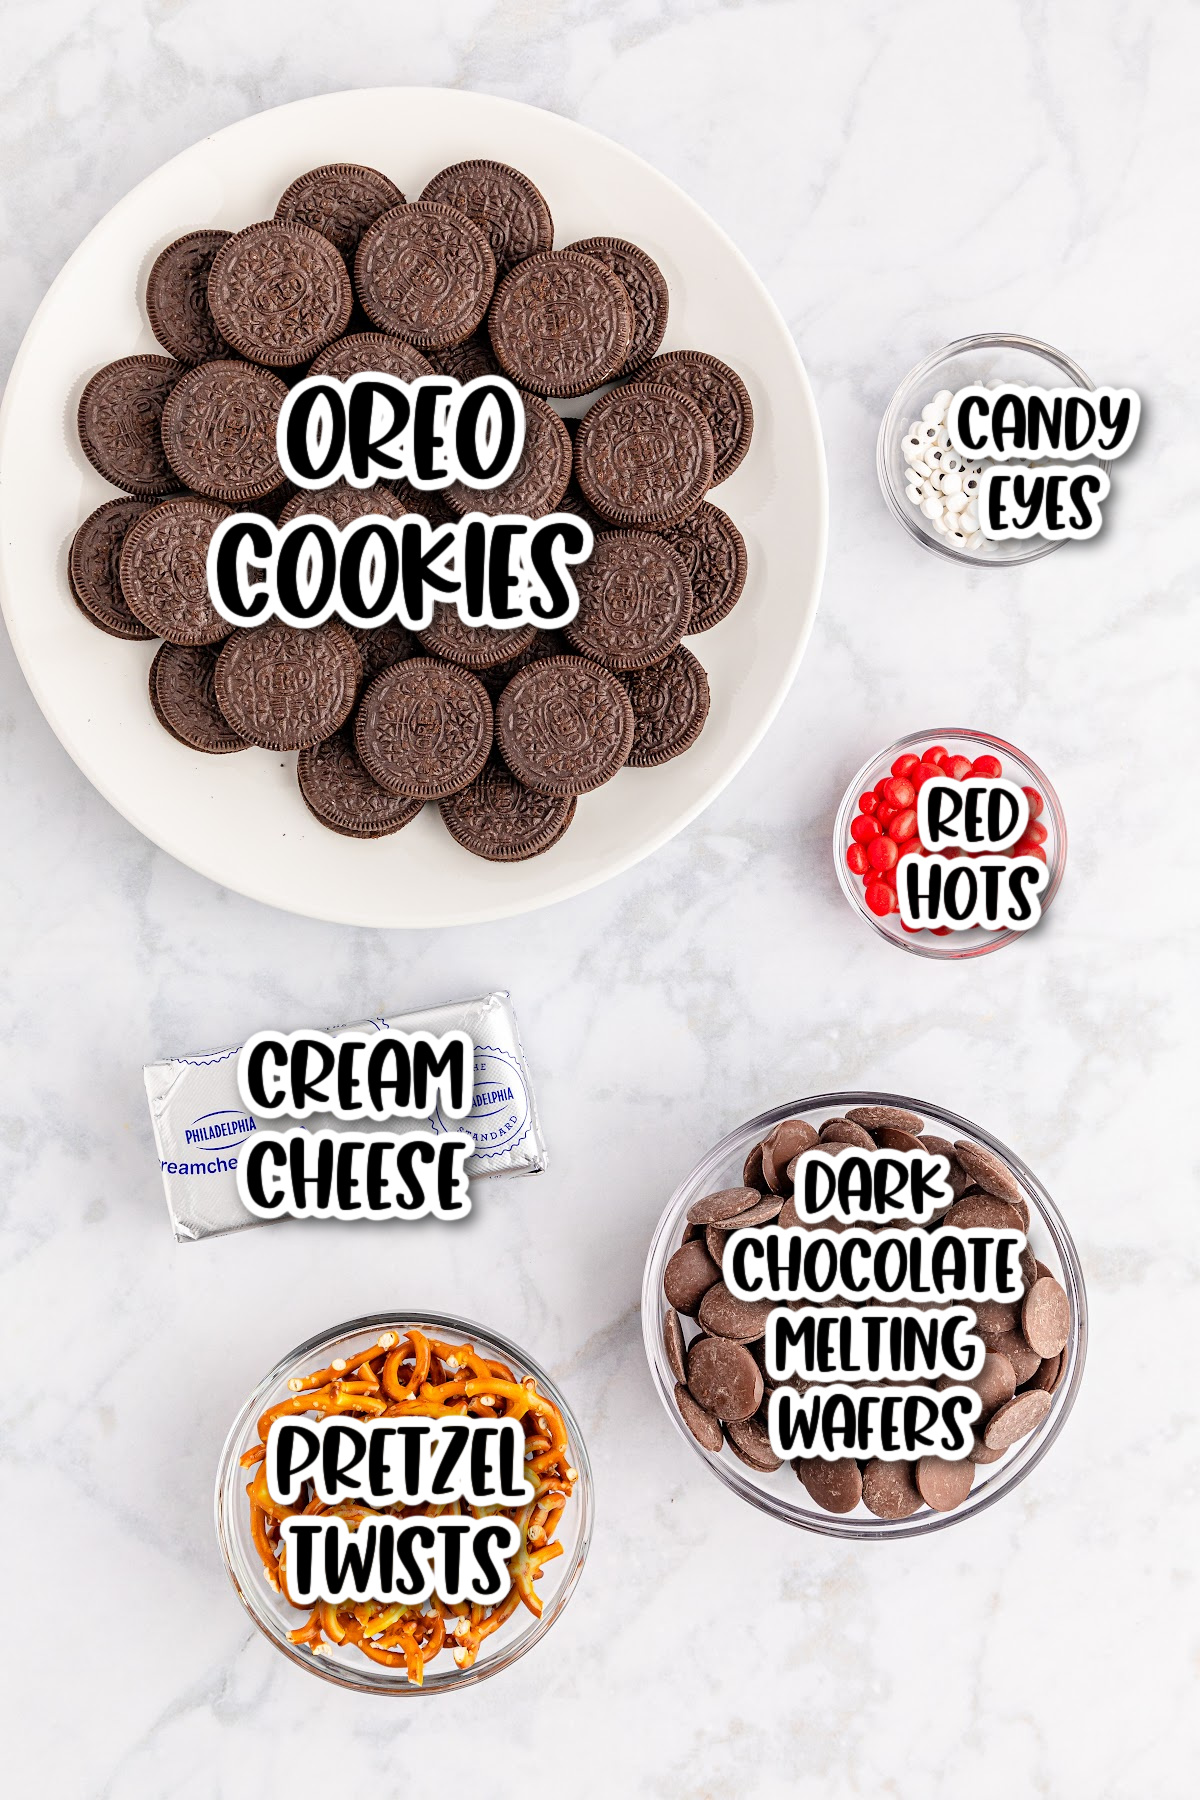 Oreo cookie ingredients on a white plate.